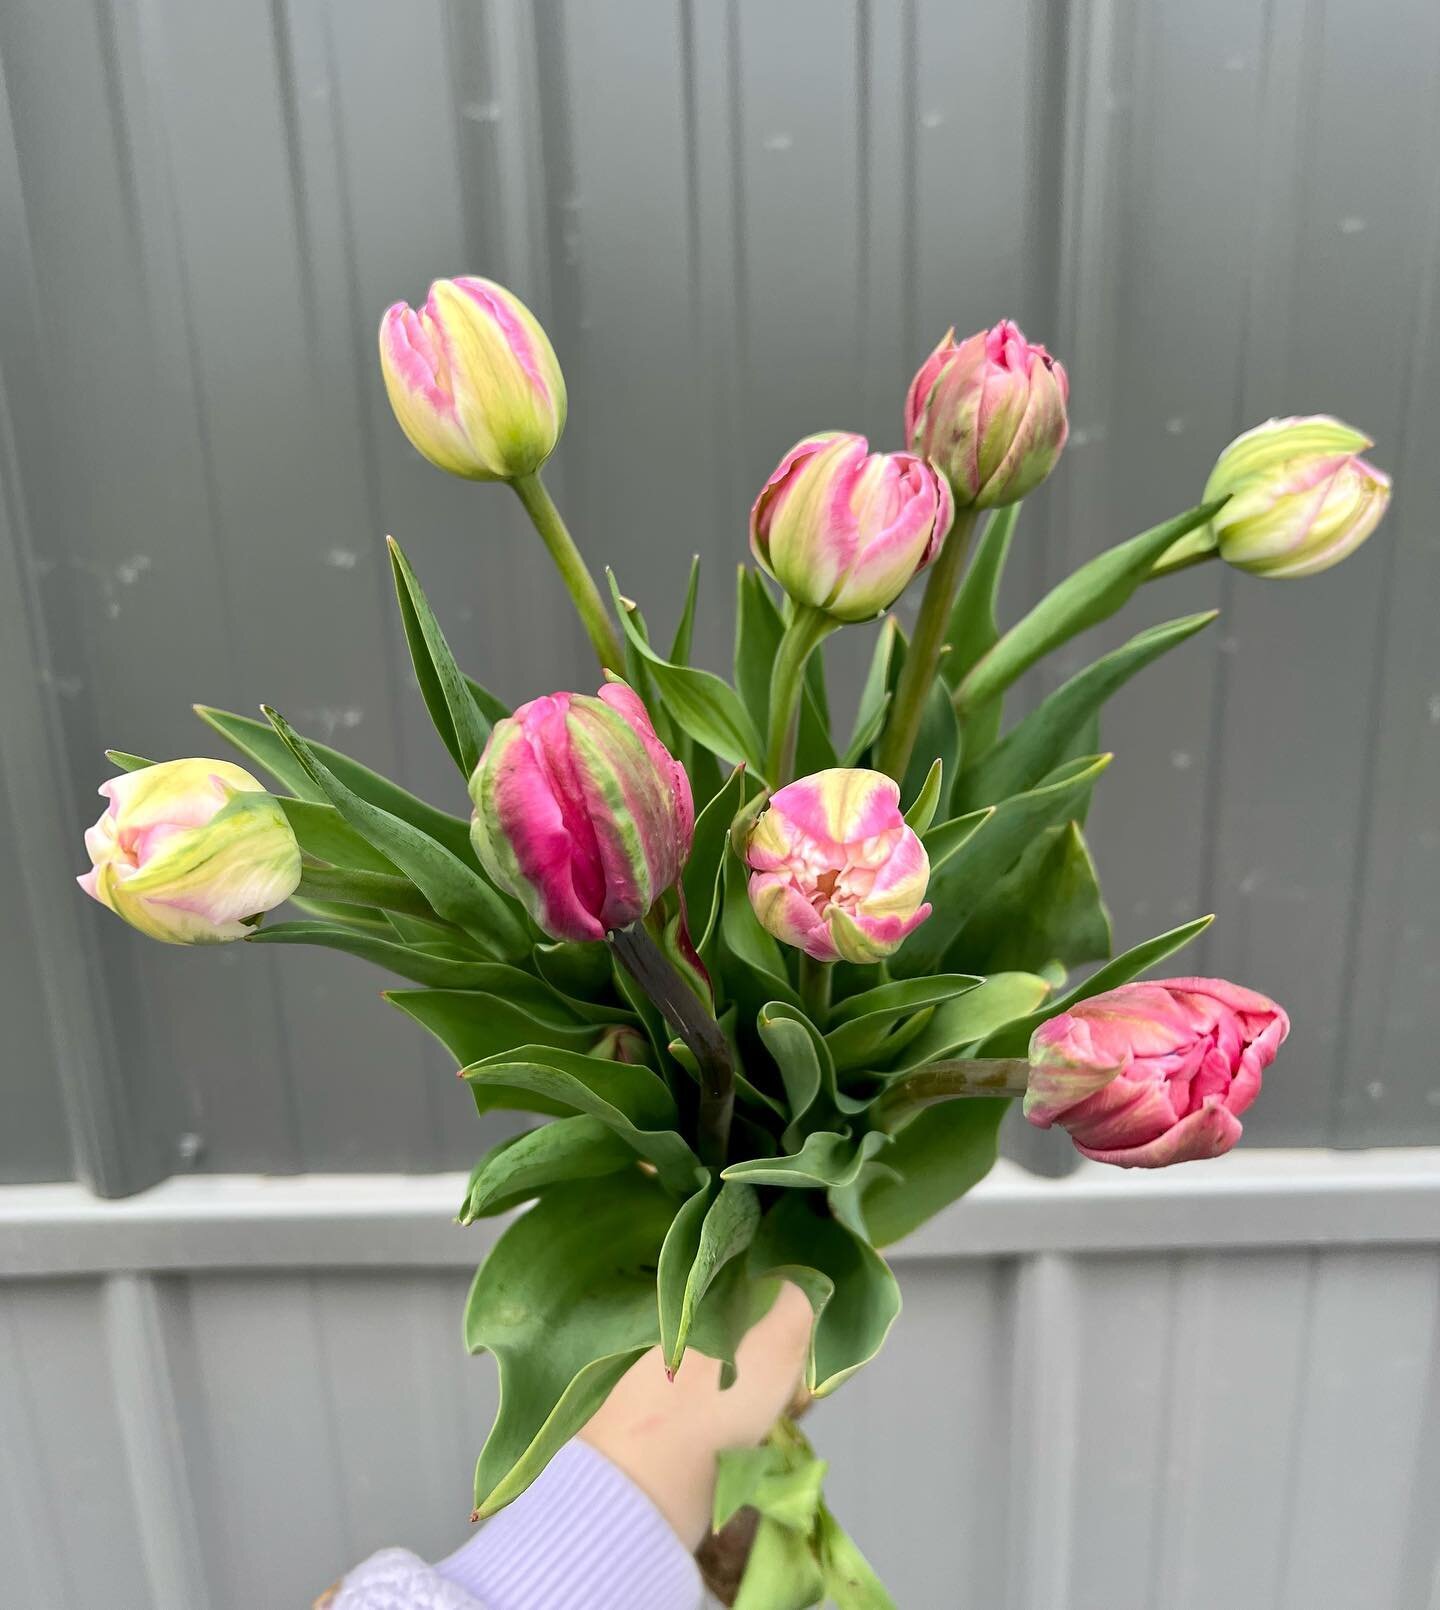 Harvested the final tulips of the year last night, just in time for our Mother&rsquo;s Day market on Saturday! Having these blooms on hand right before a huge flower holiday makes me feel like I&rsquo;ve qualified for the flower Olympics or something